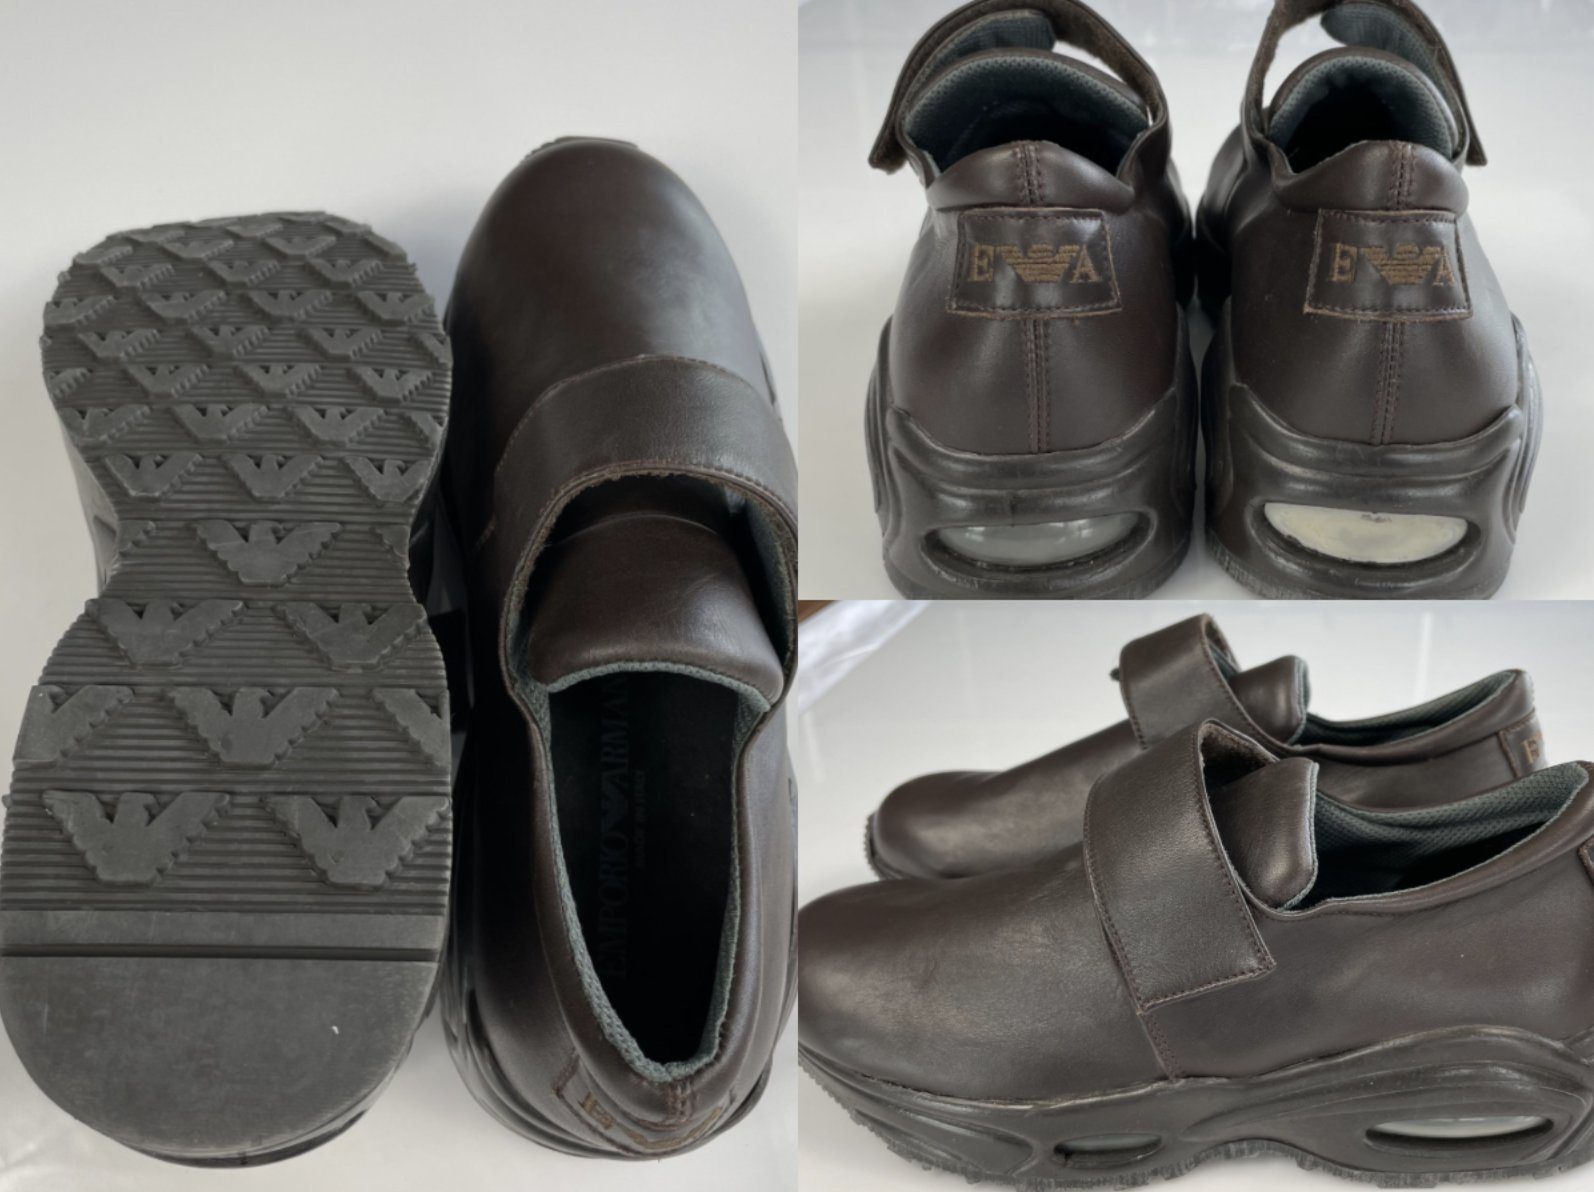 Emporio Armani Emporio Armani Vintage Used Effect Moccasins Loafers Shoes Slippers Sc Кросівки